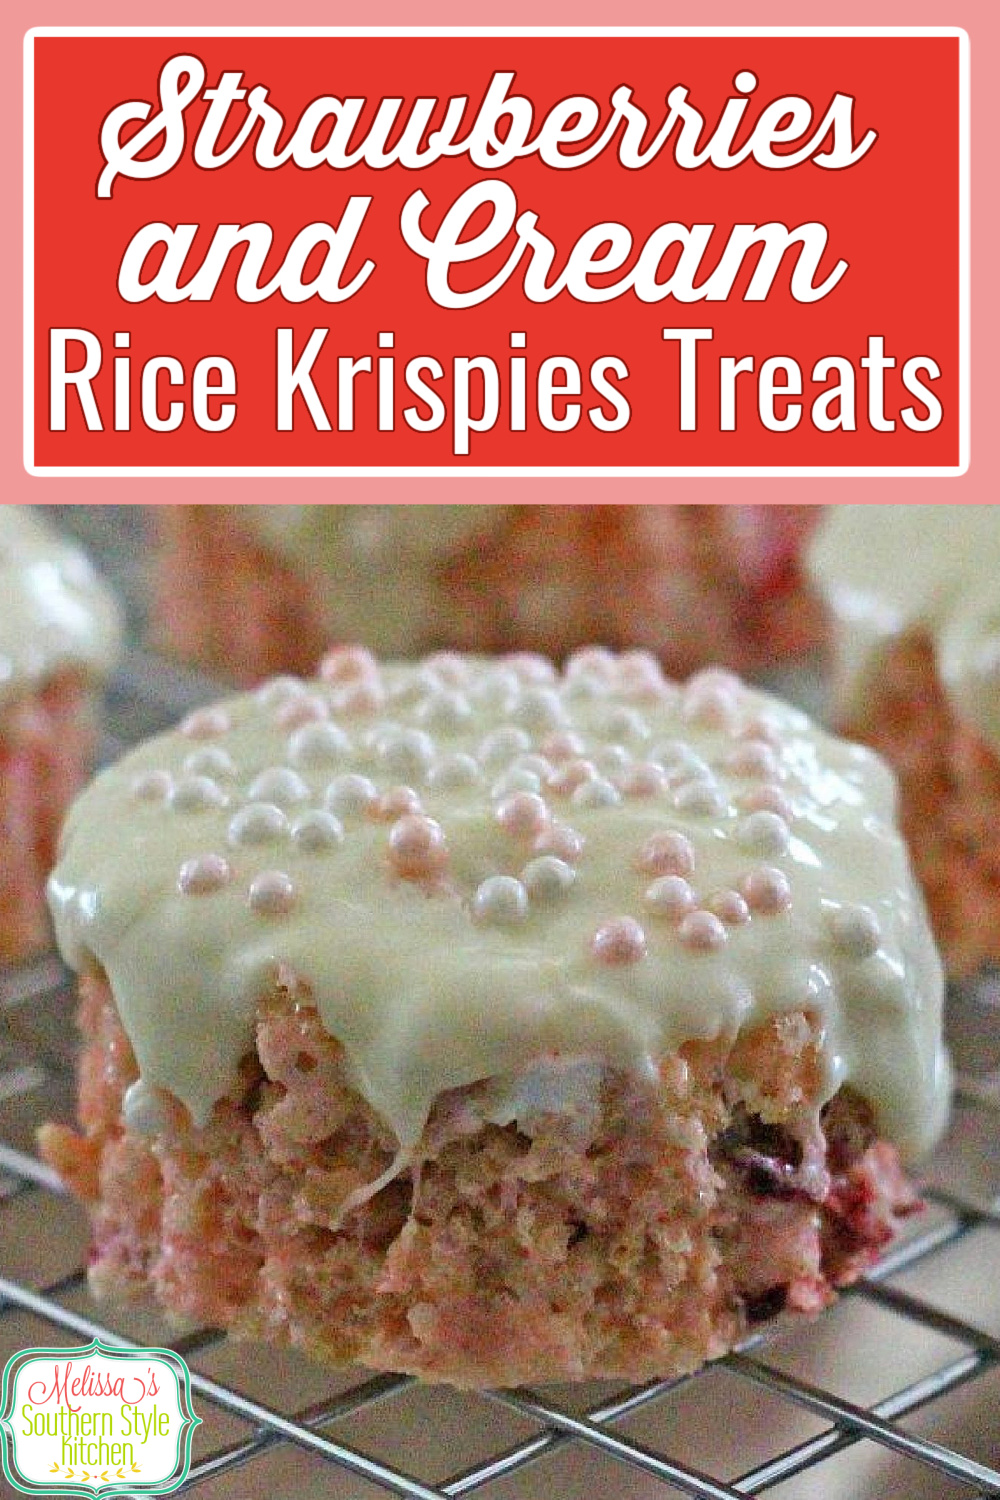 Sweet Strawberries and Cream Rice Krispies Treats will upgrade your next batch of rice krispies treats. #strawberryricekrispietreats #ricekrispietreats #strawerryhies #strawberriesandcream #easyrecipes #desserts #dessertfoodrecipes #southernrecipes #strawberry via @melissasssk